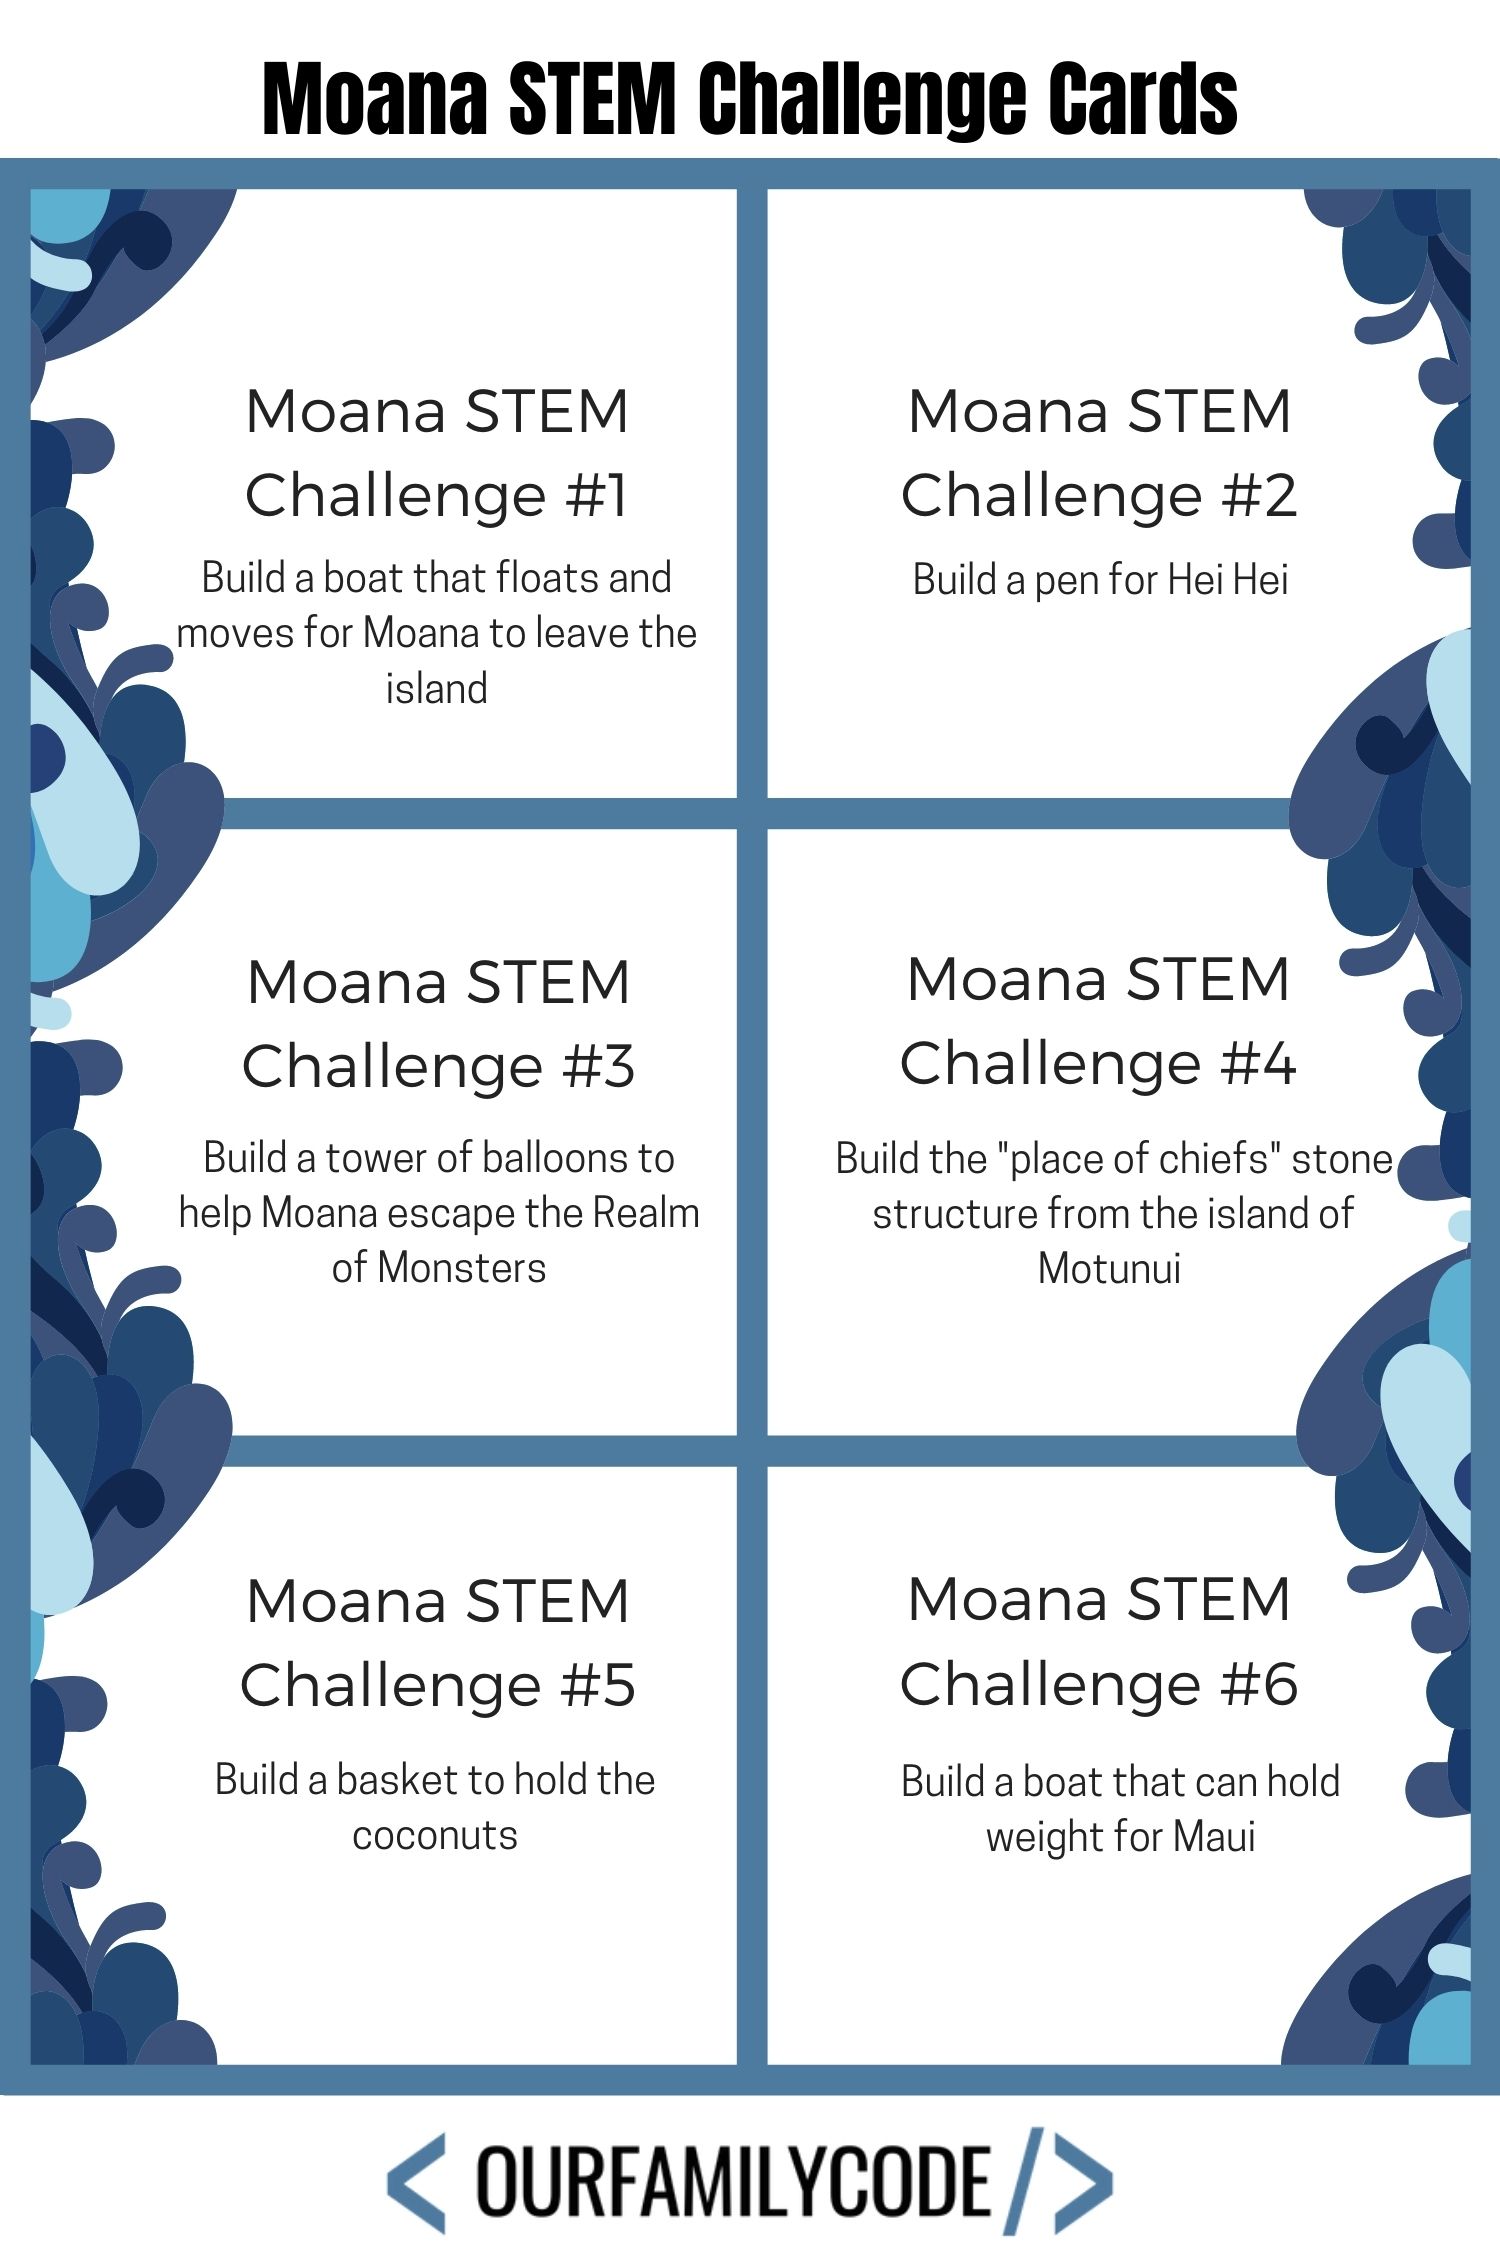 A picture of six Moana STEM challenge cards.